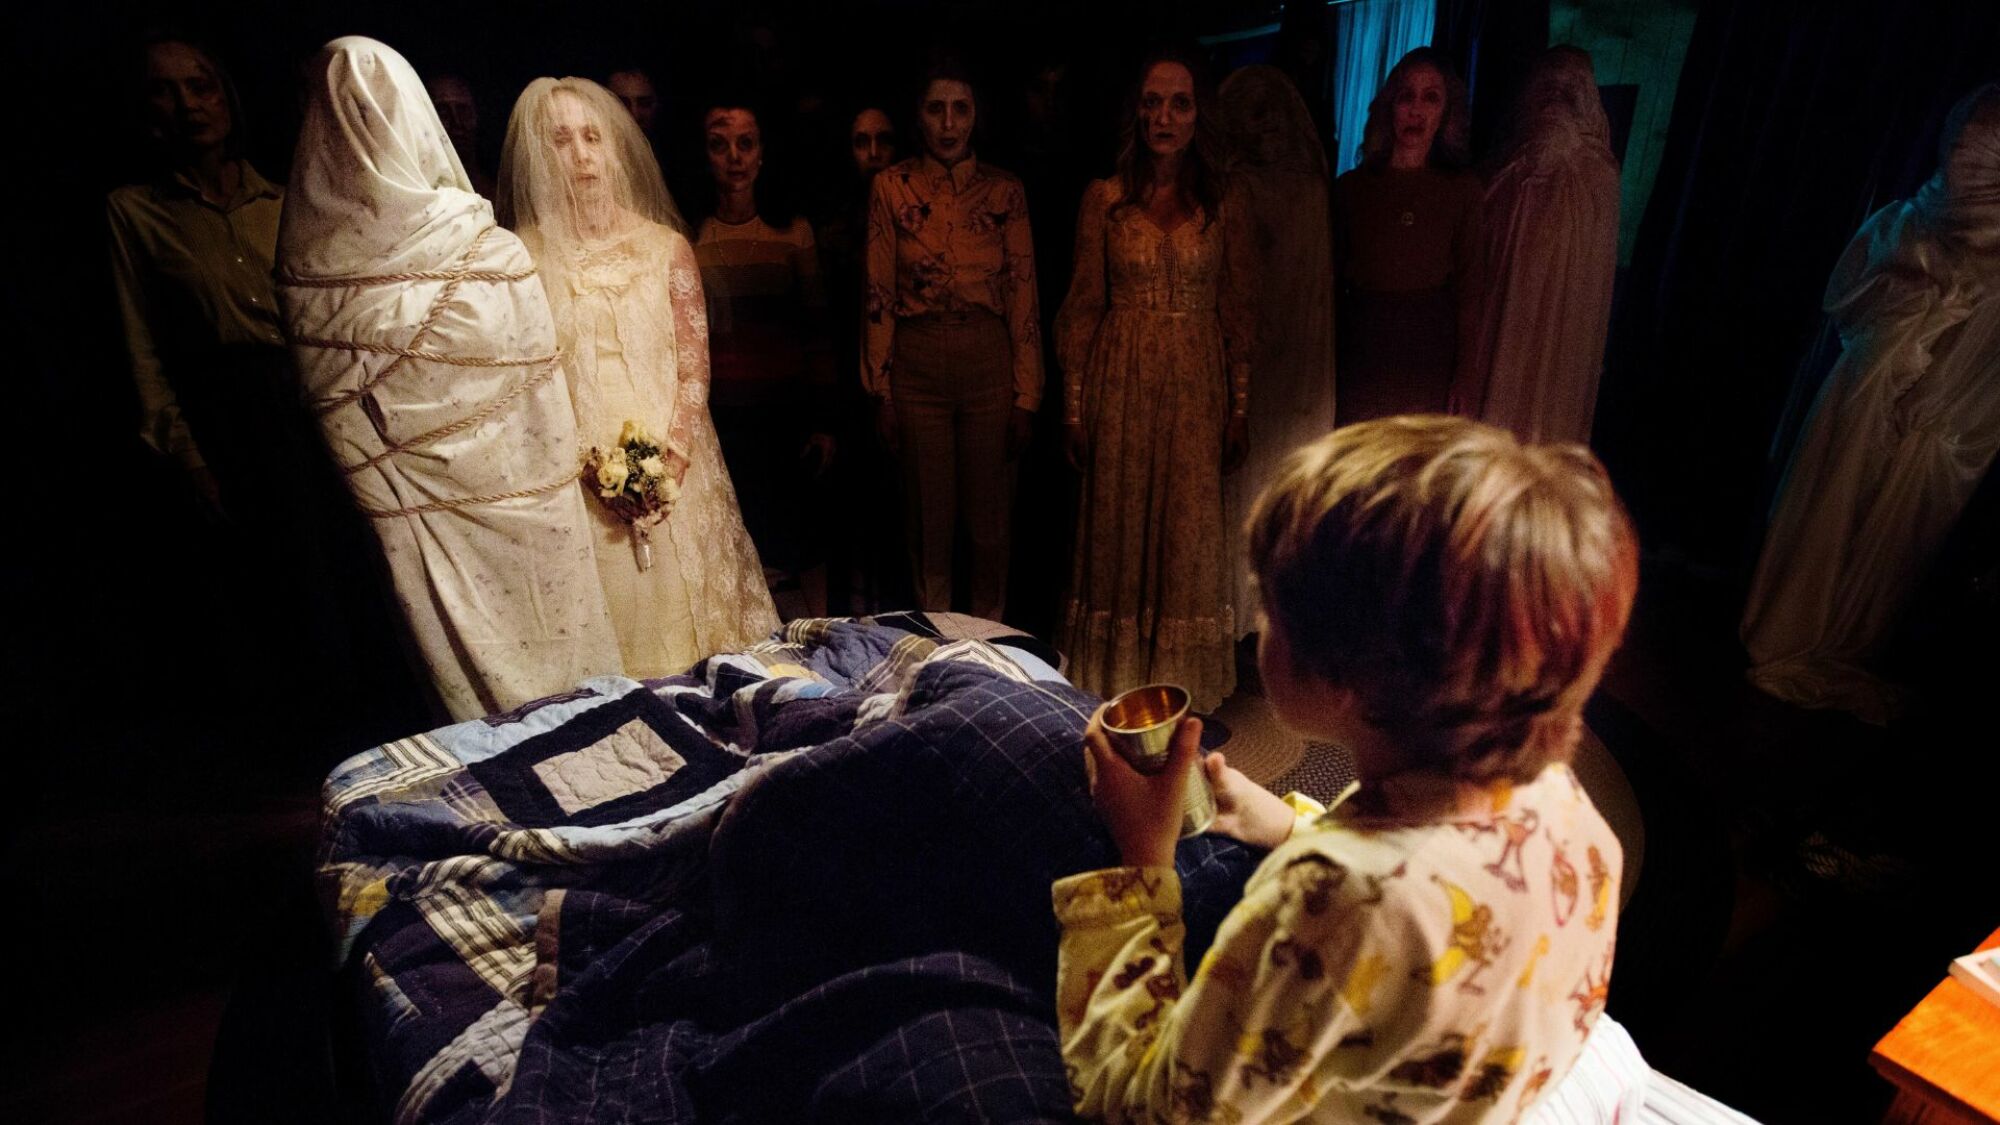 Ty Simpkins Insidious - Chapter 2 - 2013